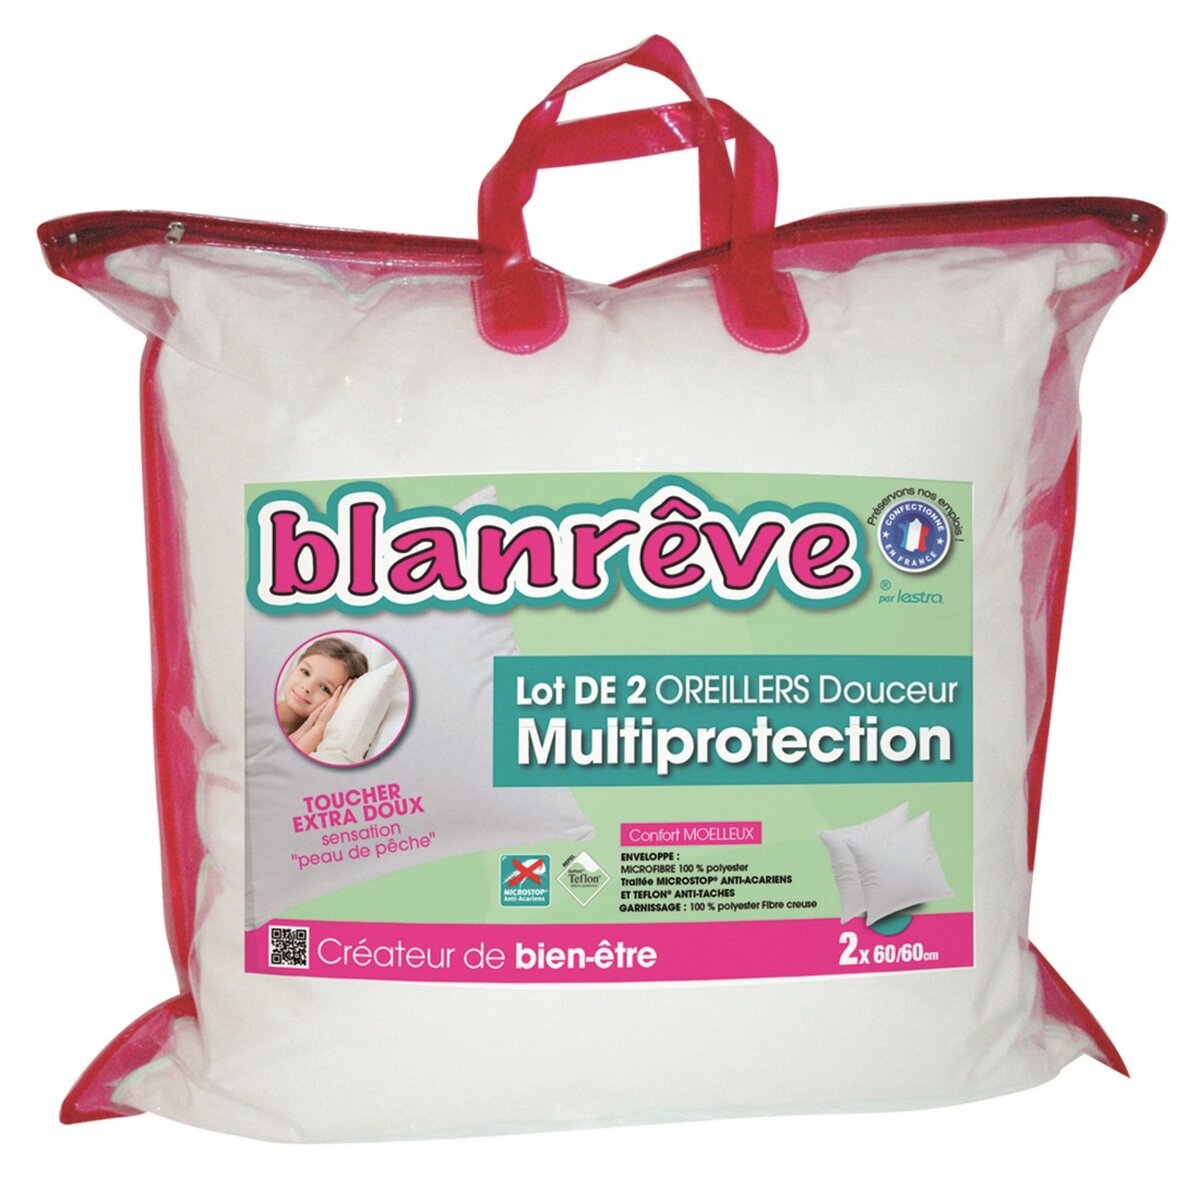 LESTRA Lot 2 oreillers multiprotection BLANREVE